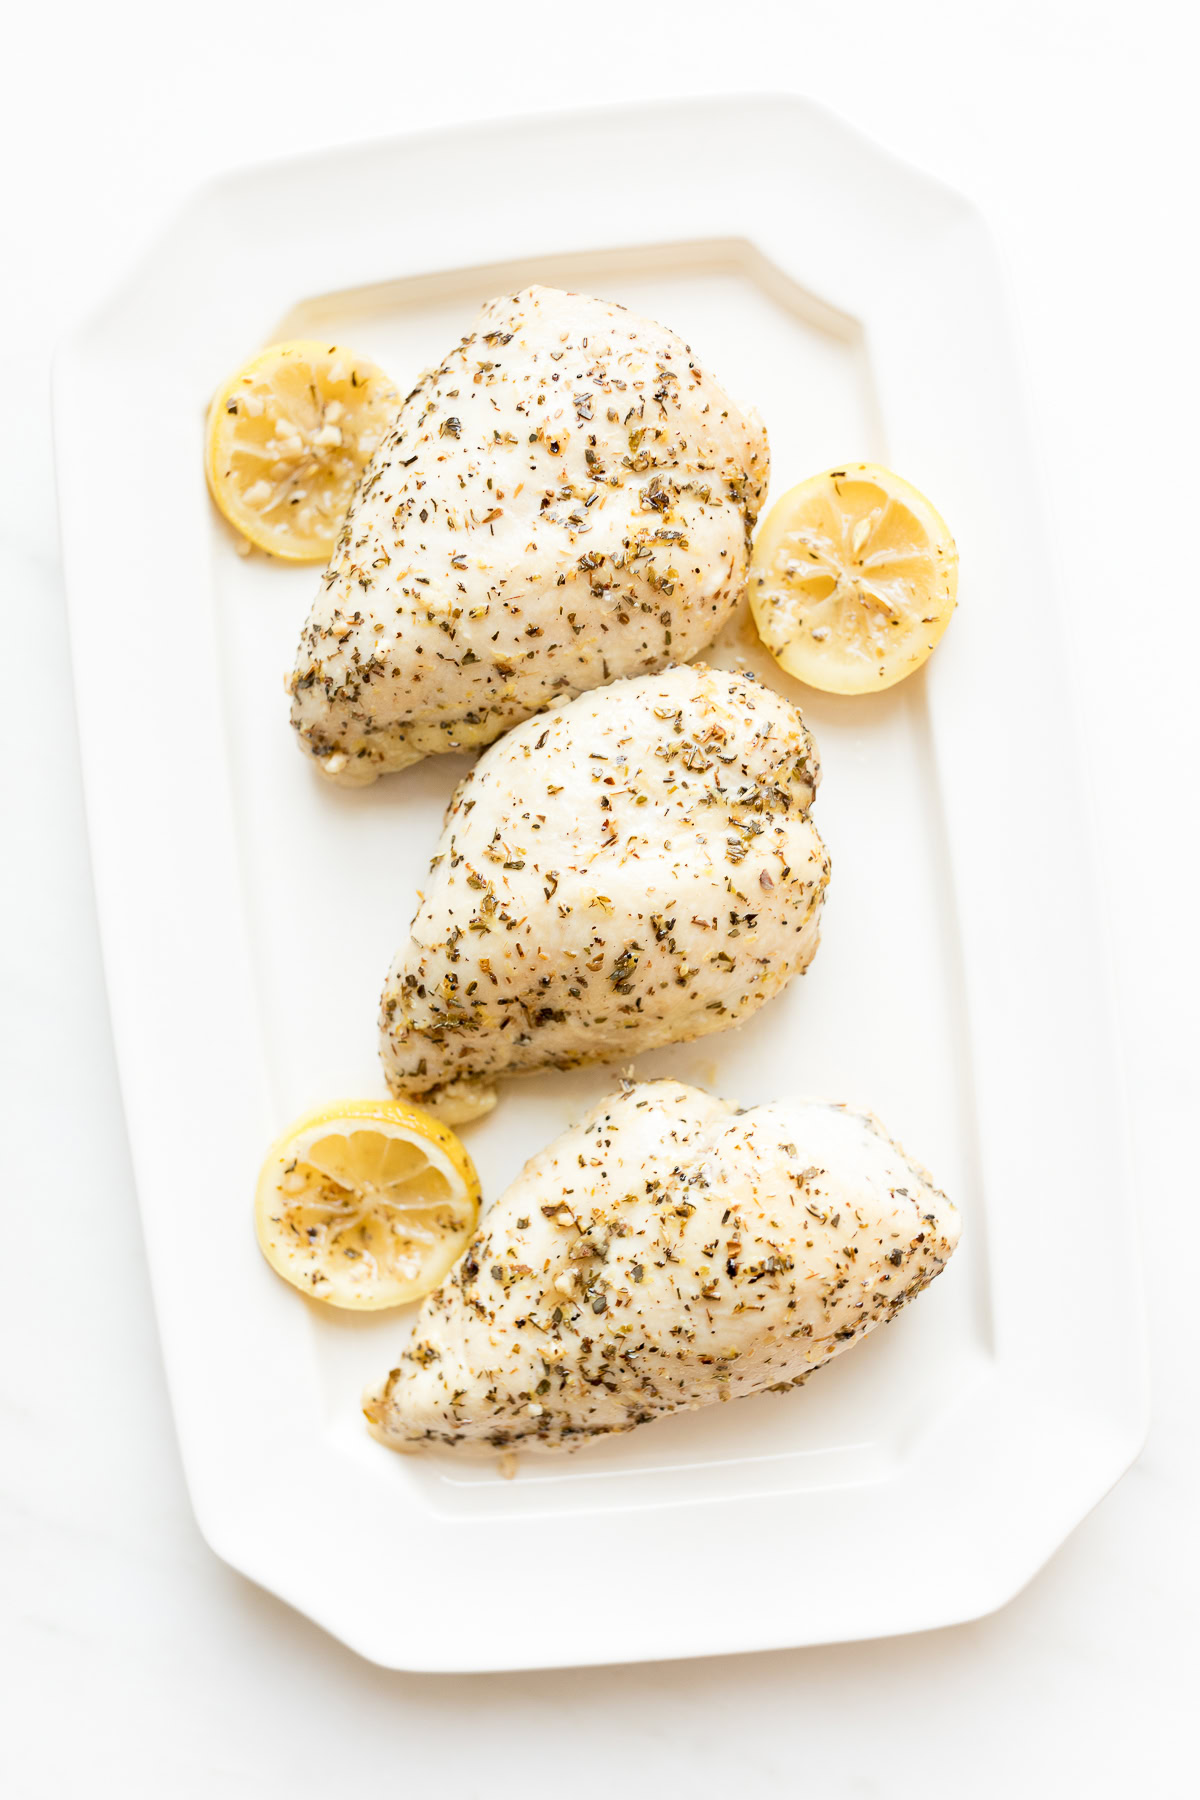 Three raw chicken breasts marinated with herbs and lemon sauce on a white rectangular plate.